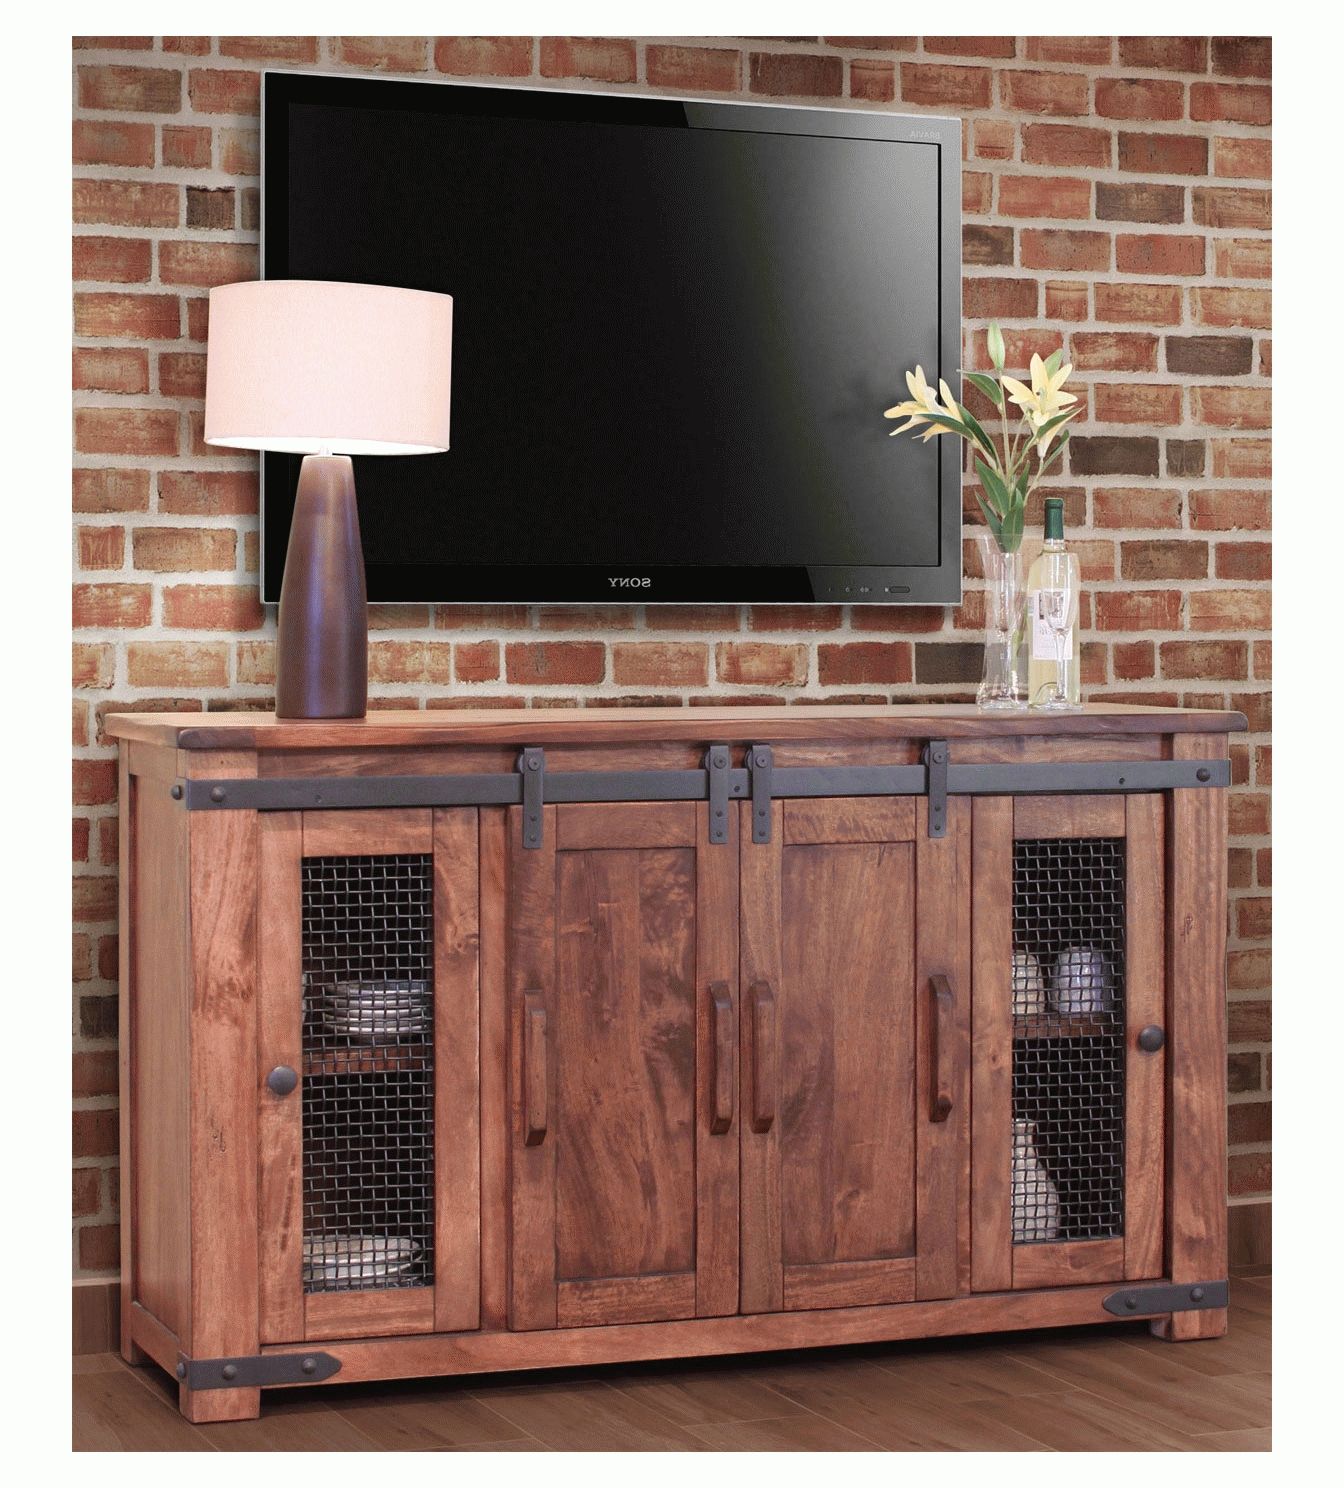 Rustic Barn Door Tv Stand, Barn Door Tv Stand, Barn Door Tv Console Intended For Rustic Tv Cabinets (View 3 of 20)